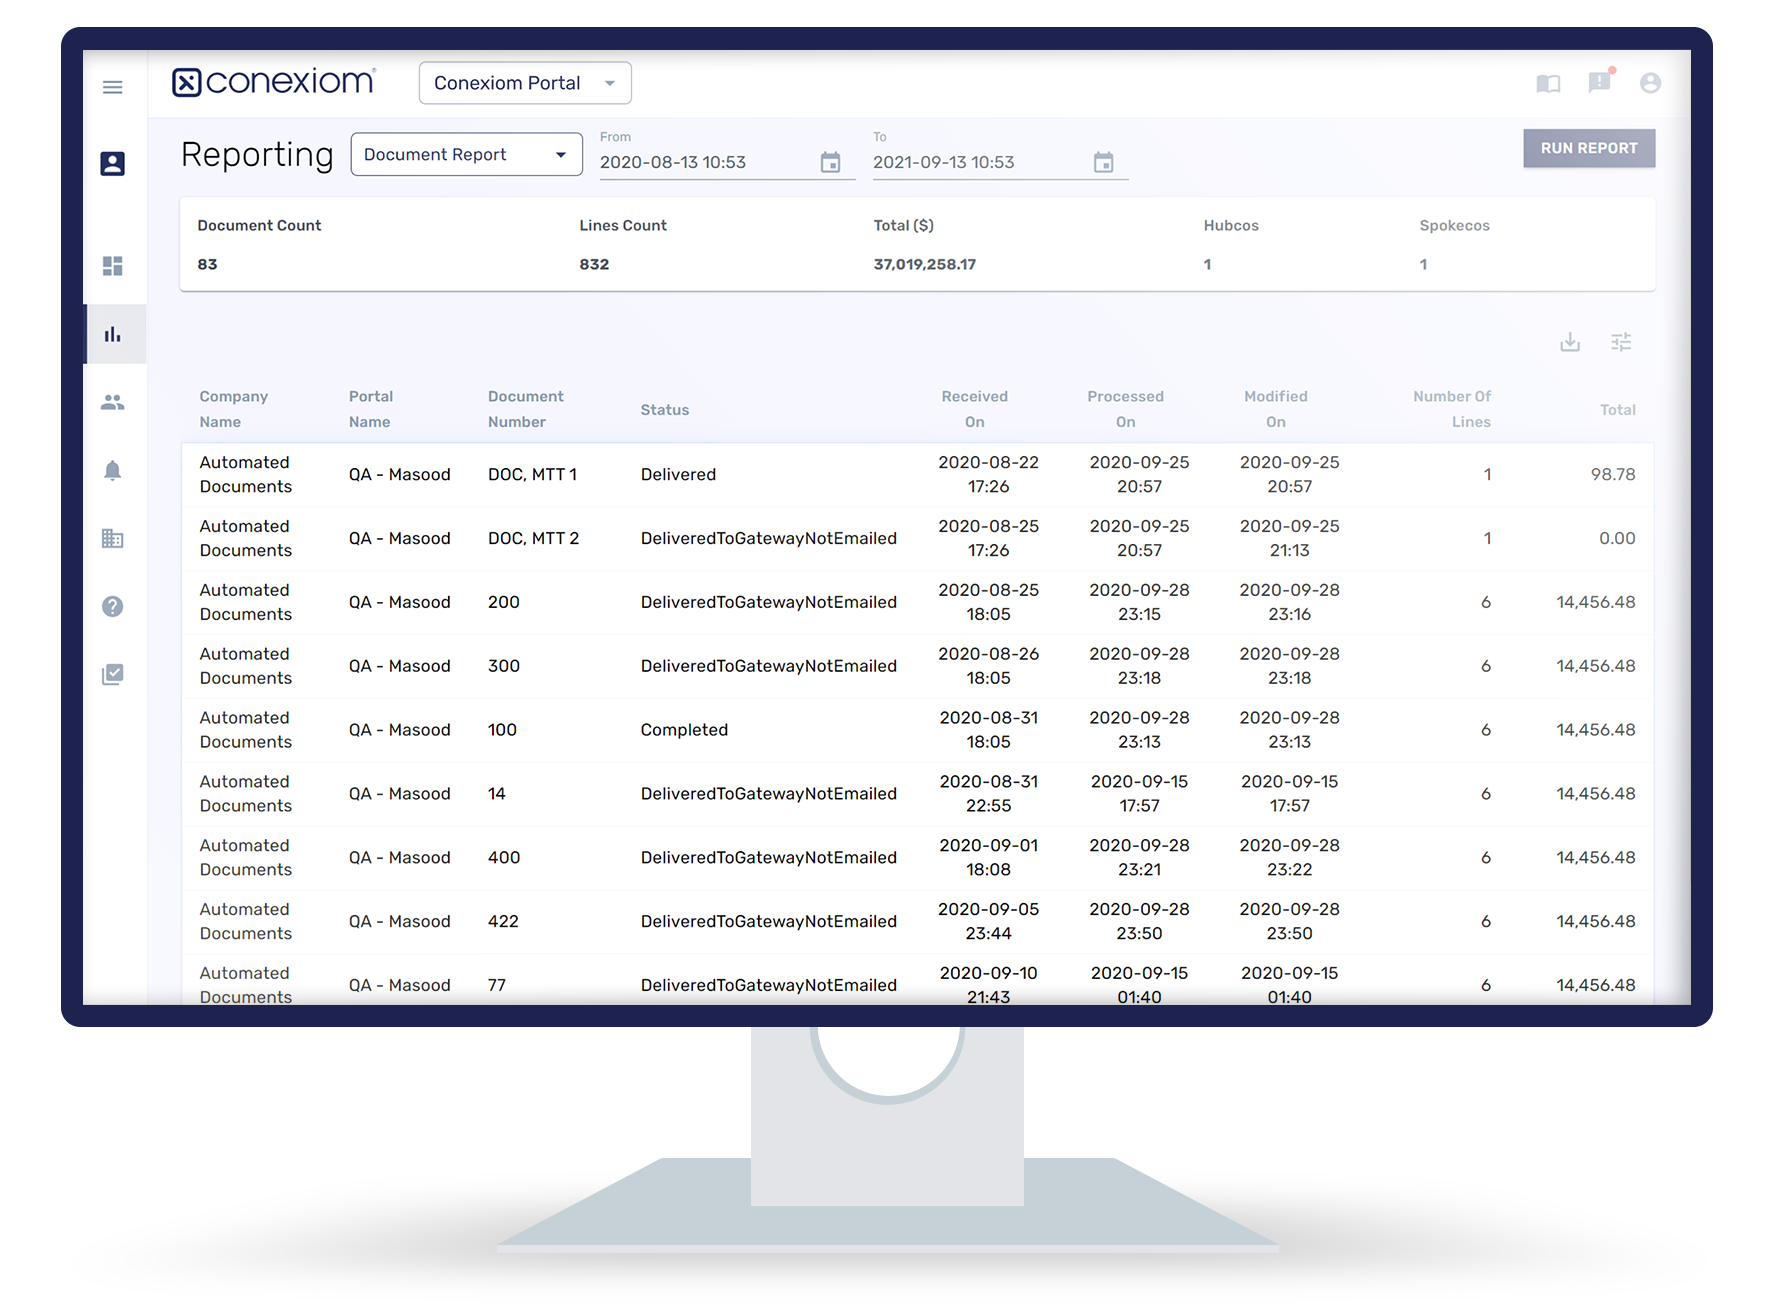 Reports & Dashboards - Monitor activity for full visibility of document processing speed and volume with Reports & Dashboards.